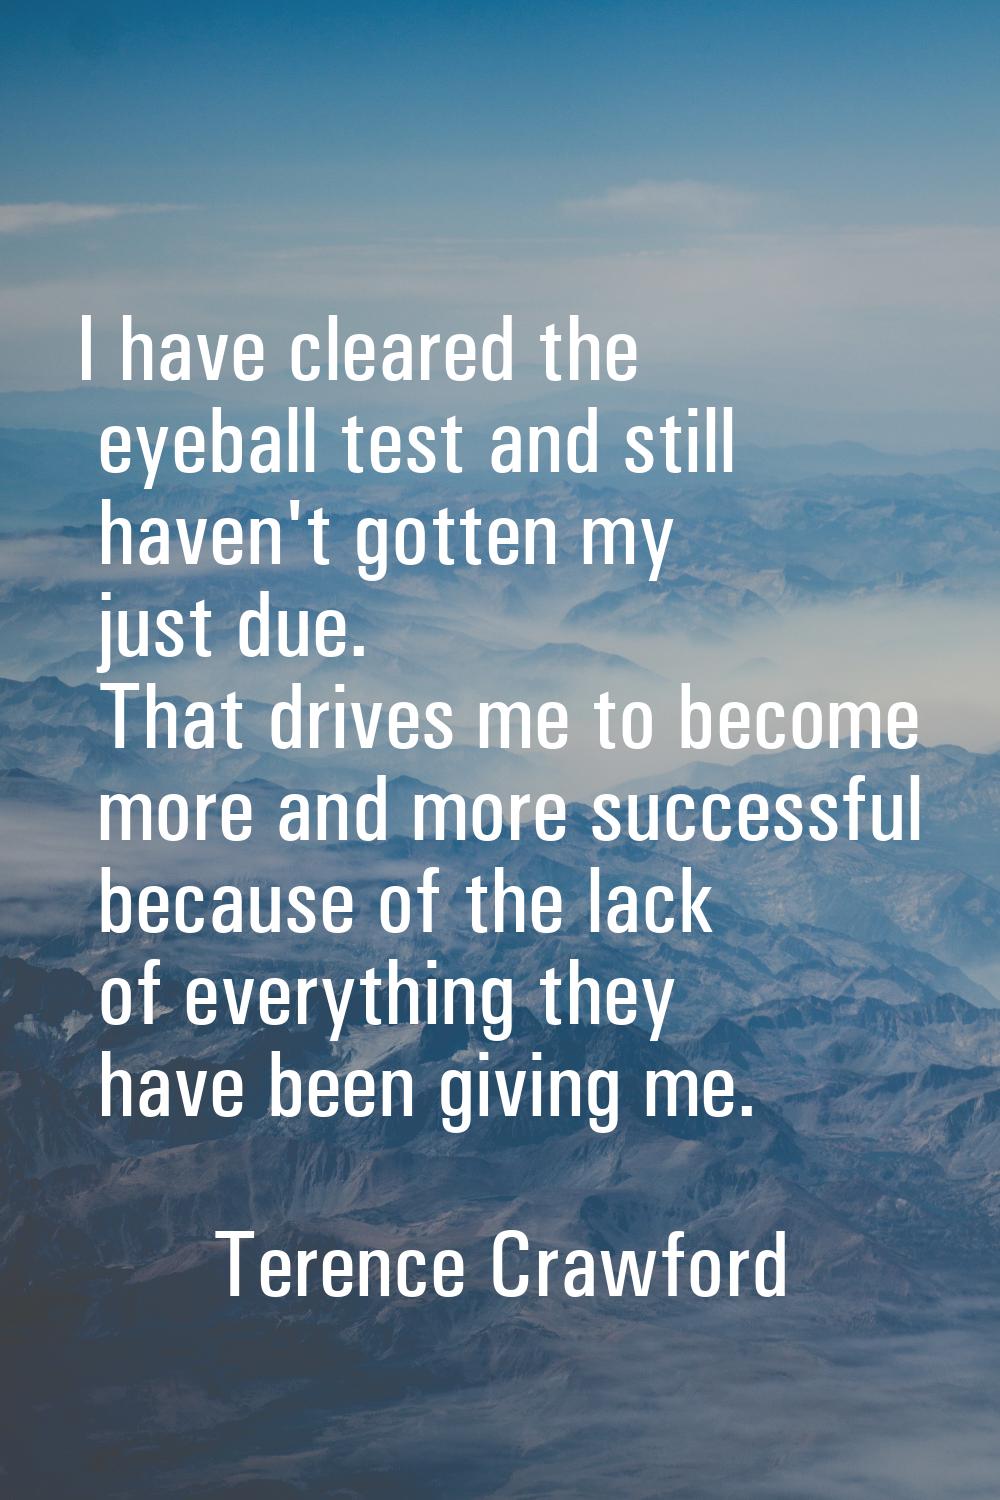 I have cleared the eyeball test and still haven't gotten my just due. That drives me to become more